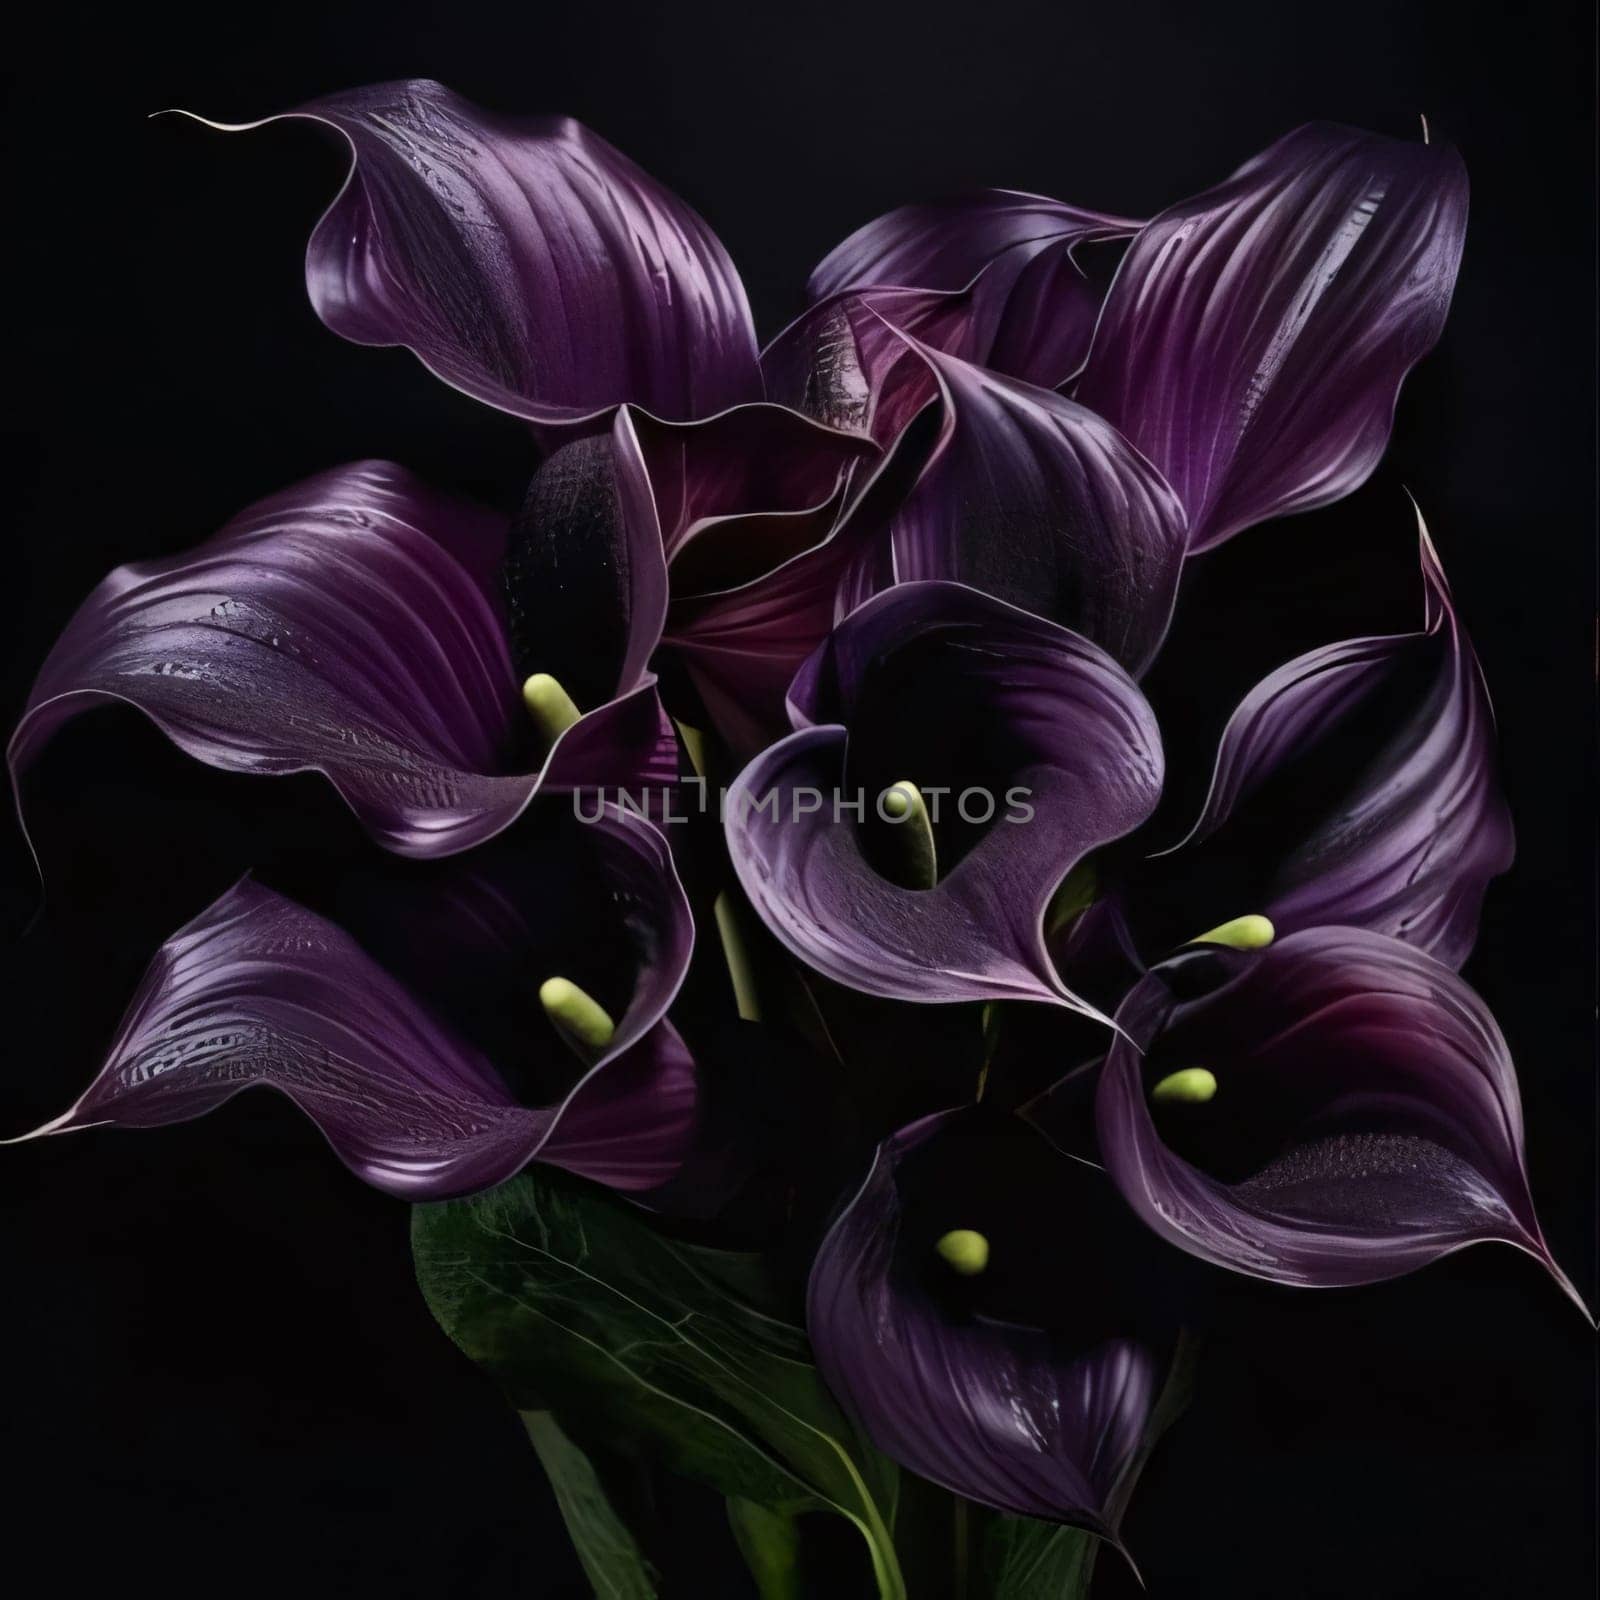 Purple lilies bouquet of flowers on a dark background. Flowering flowers, a symbol of spring, new life. A joyful time of nature waking up to life.